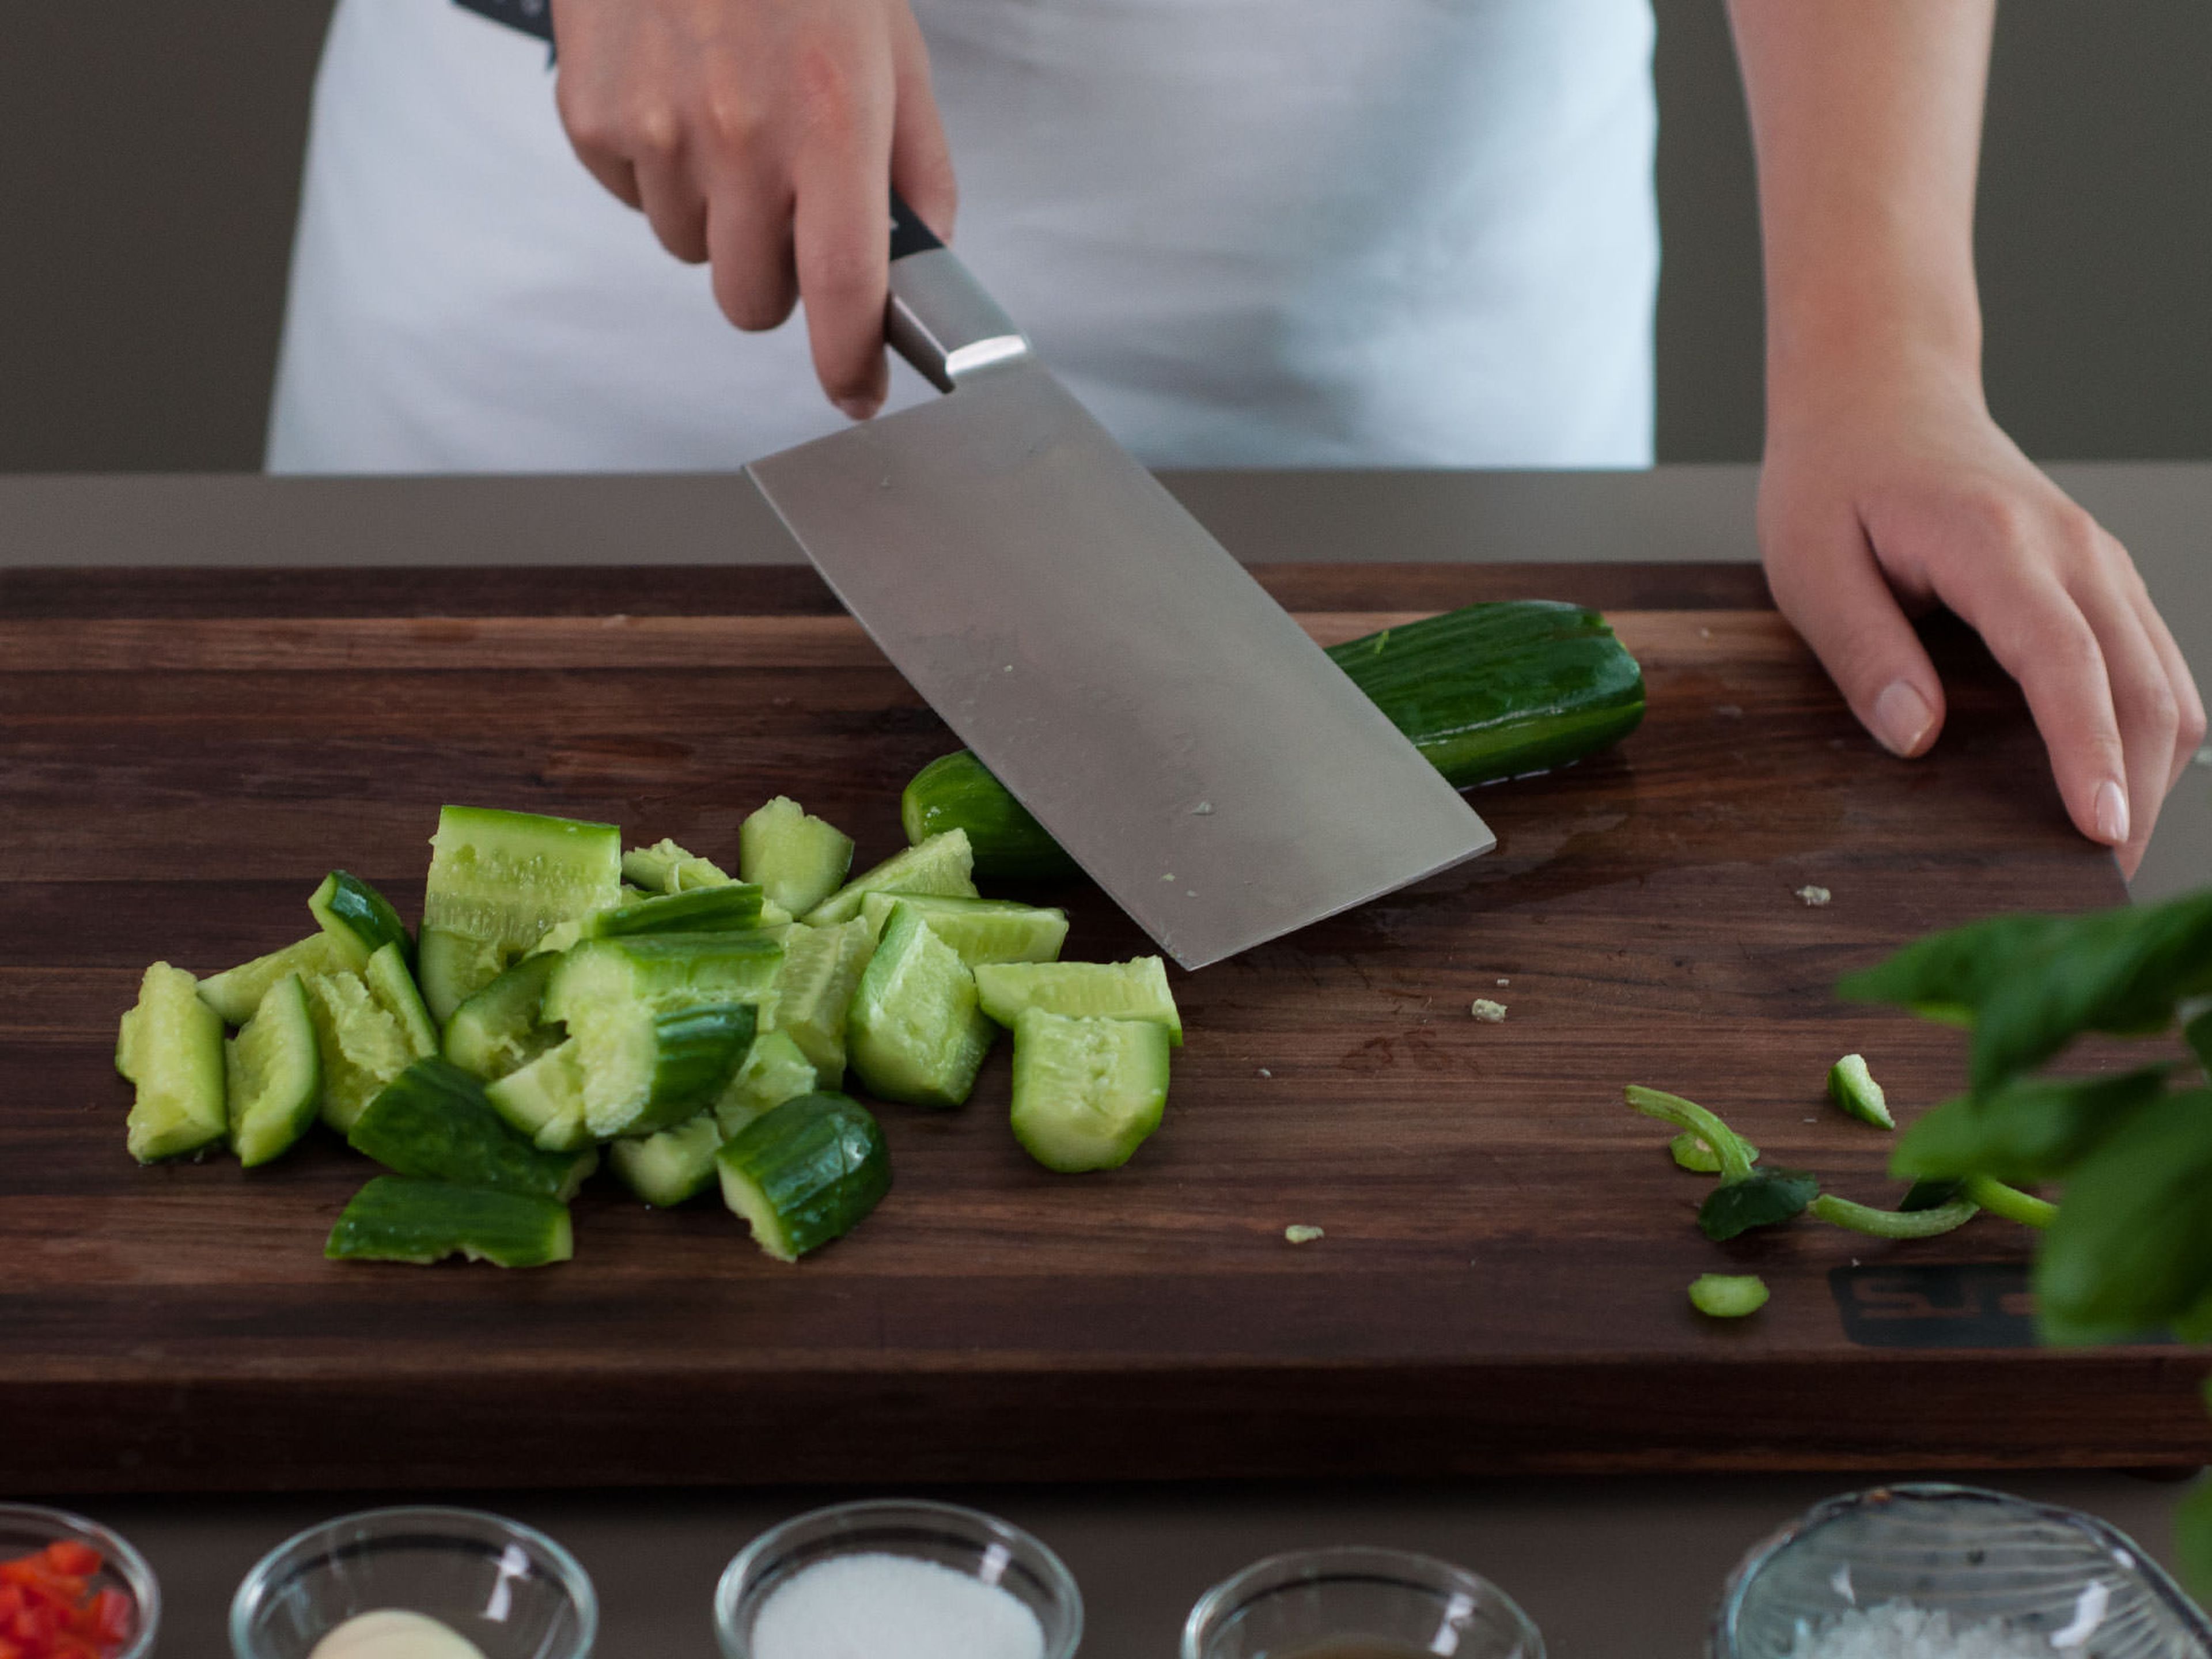 Smash cucumber with a cleaver, cut into thick slices, and transfer to a plate. Crush and mince garlic and sprinkle on top of cucumber. Season with salt and sugar. Drizzle sesame oil on top. Sprinkle diced bell pepper on top. Lightly toss salad and enjoy as a light snack or side dish with Asian fare!